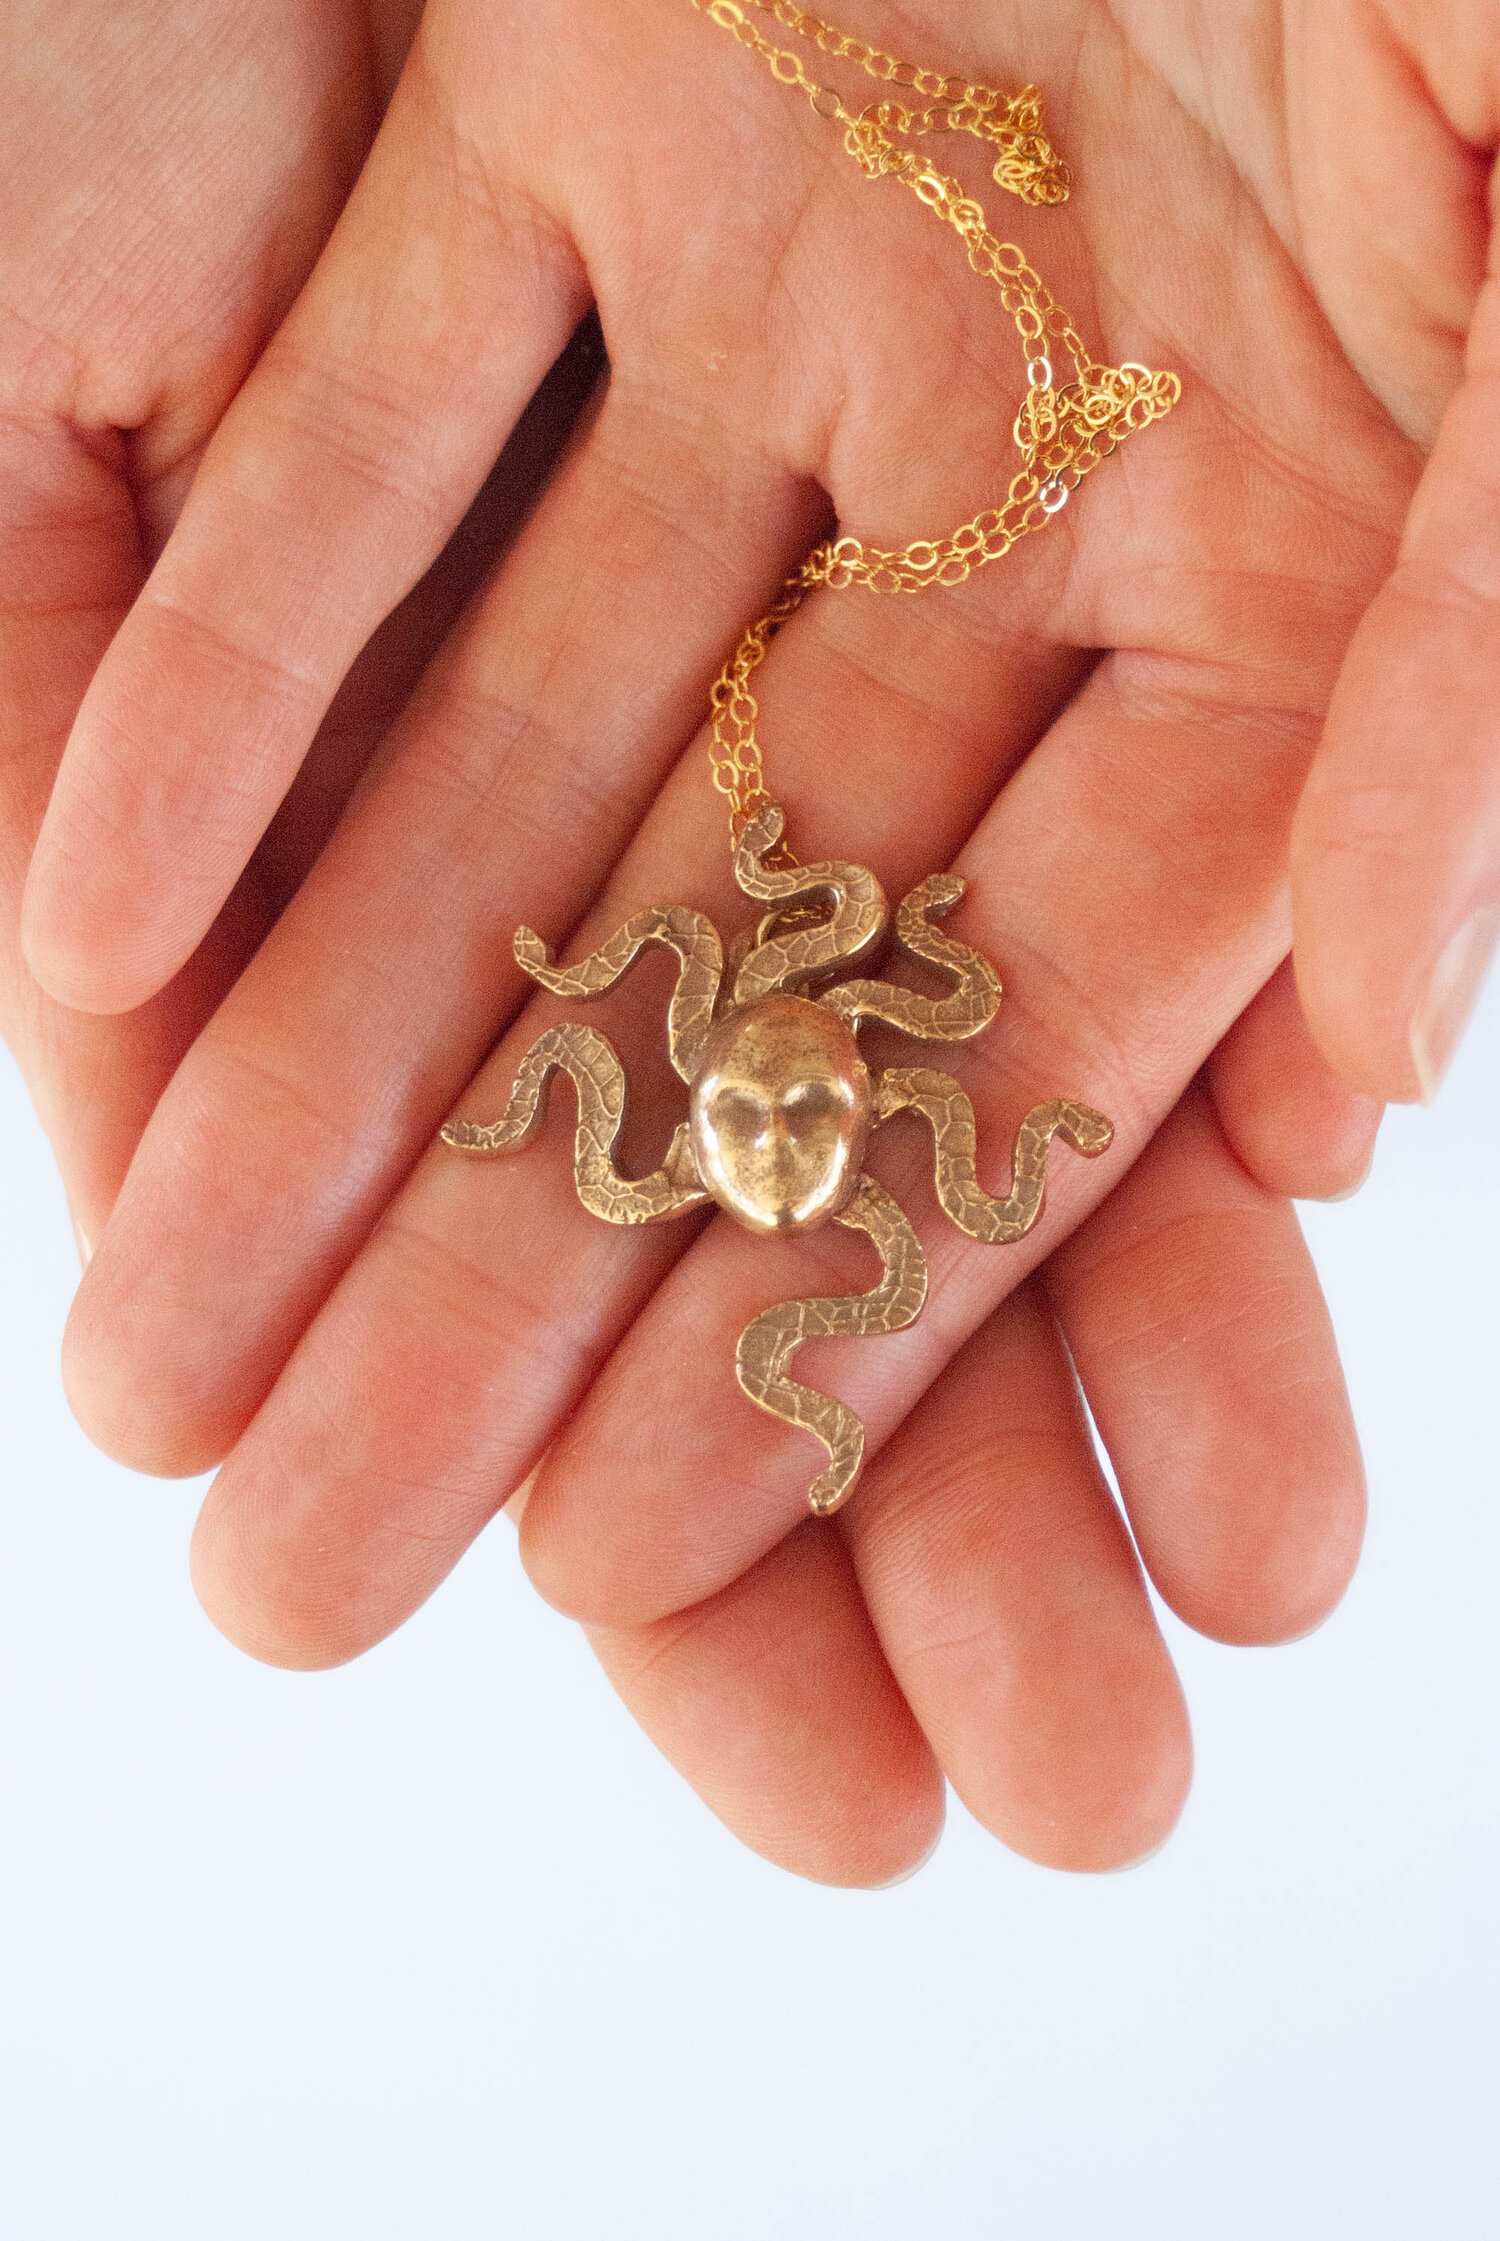 Caravaggio-Inspired Medusa Head Necklace — Bang-Up Betty